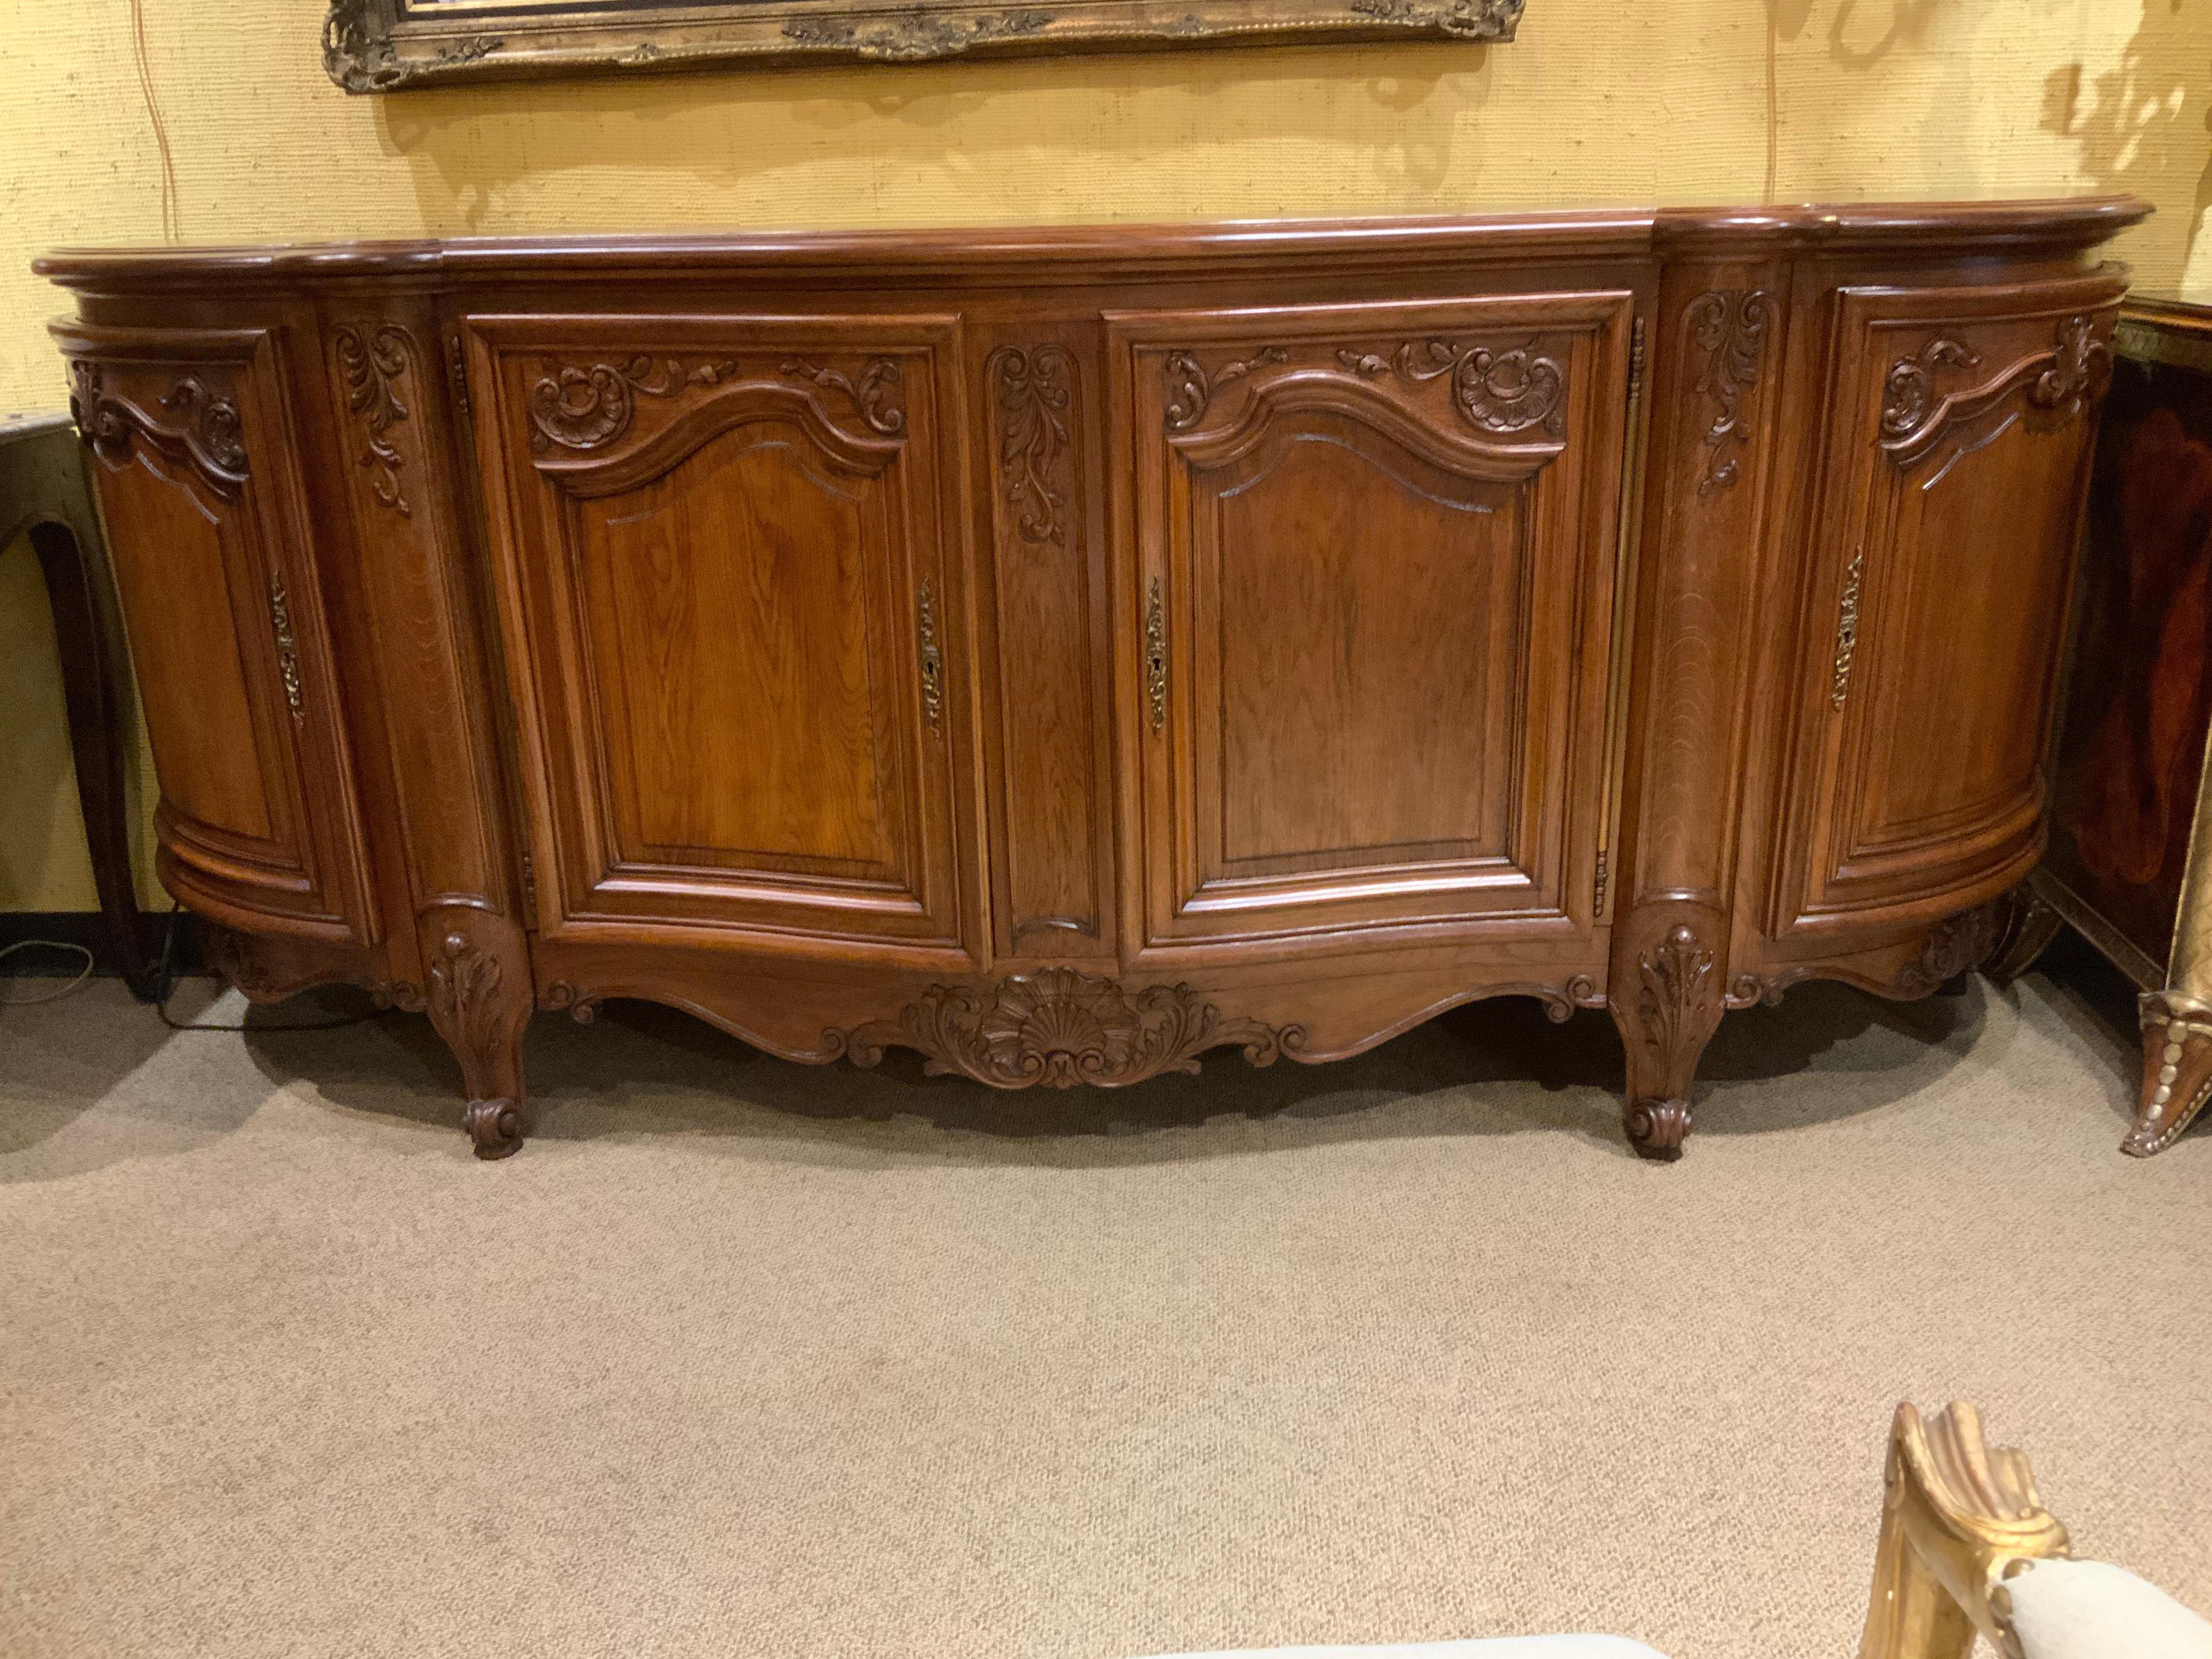 Large piece made of oak in the Louis XV-Style. Having four doors with
Great storage. The sides are gracefully curved and each side has two
Shelves. The center doors open each side has a drawer for flatware.
The legs are curved in the Louis